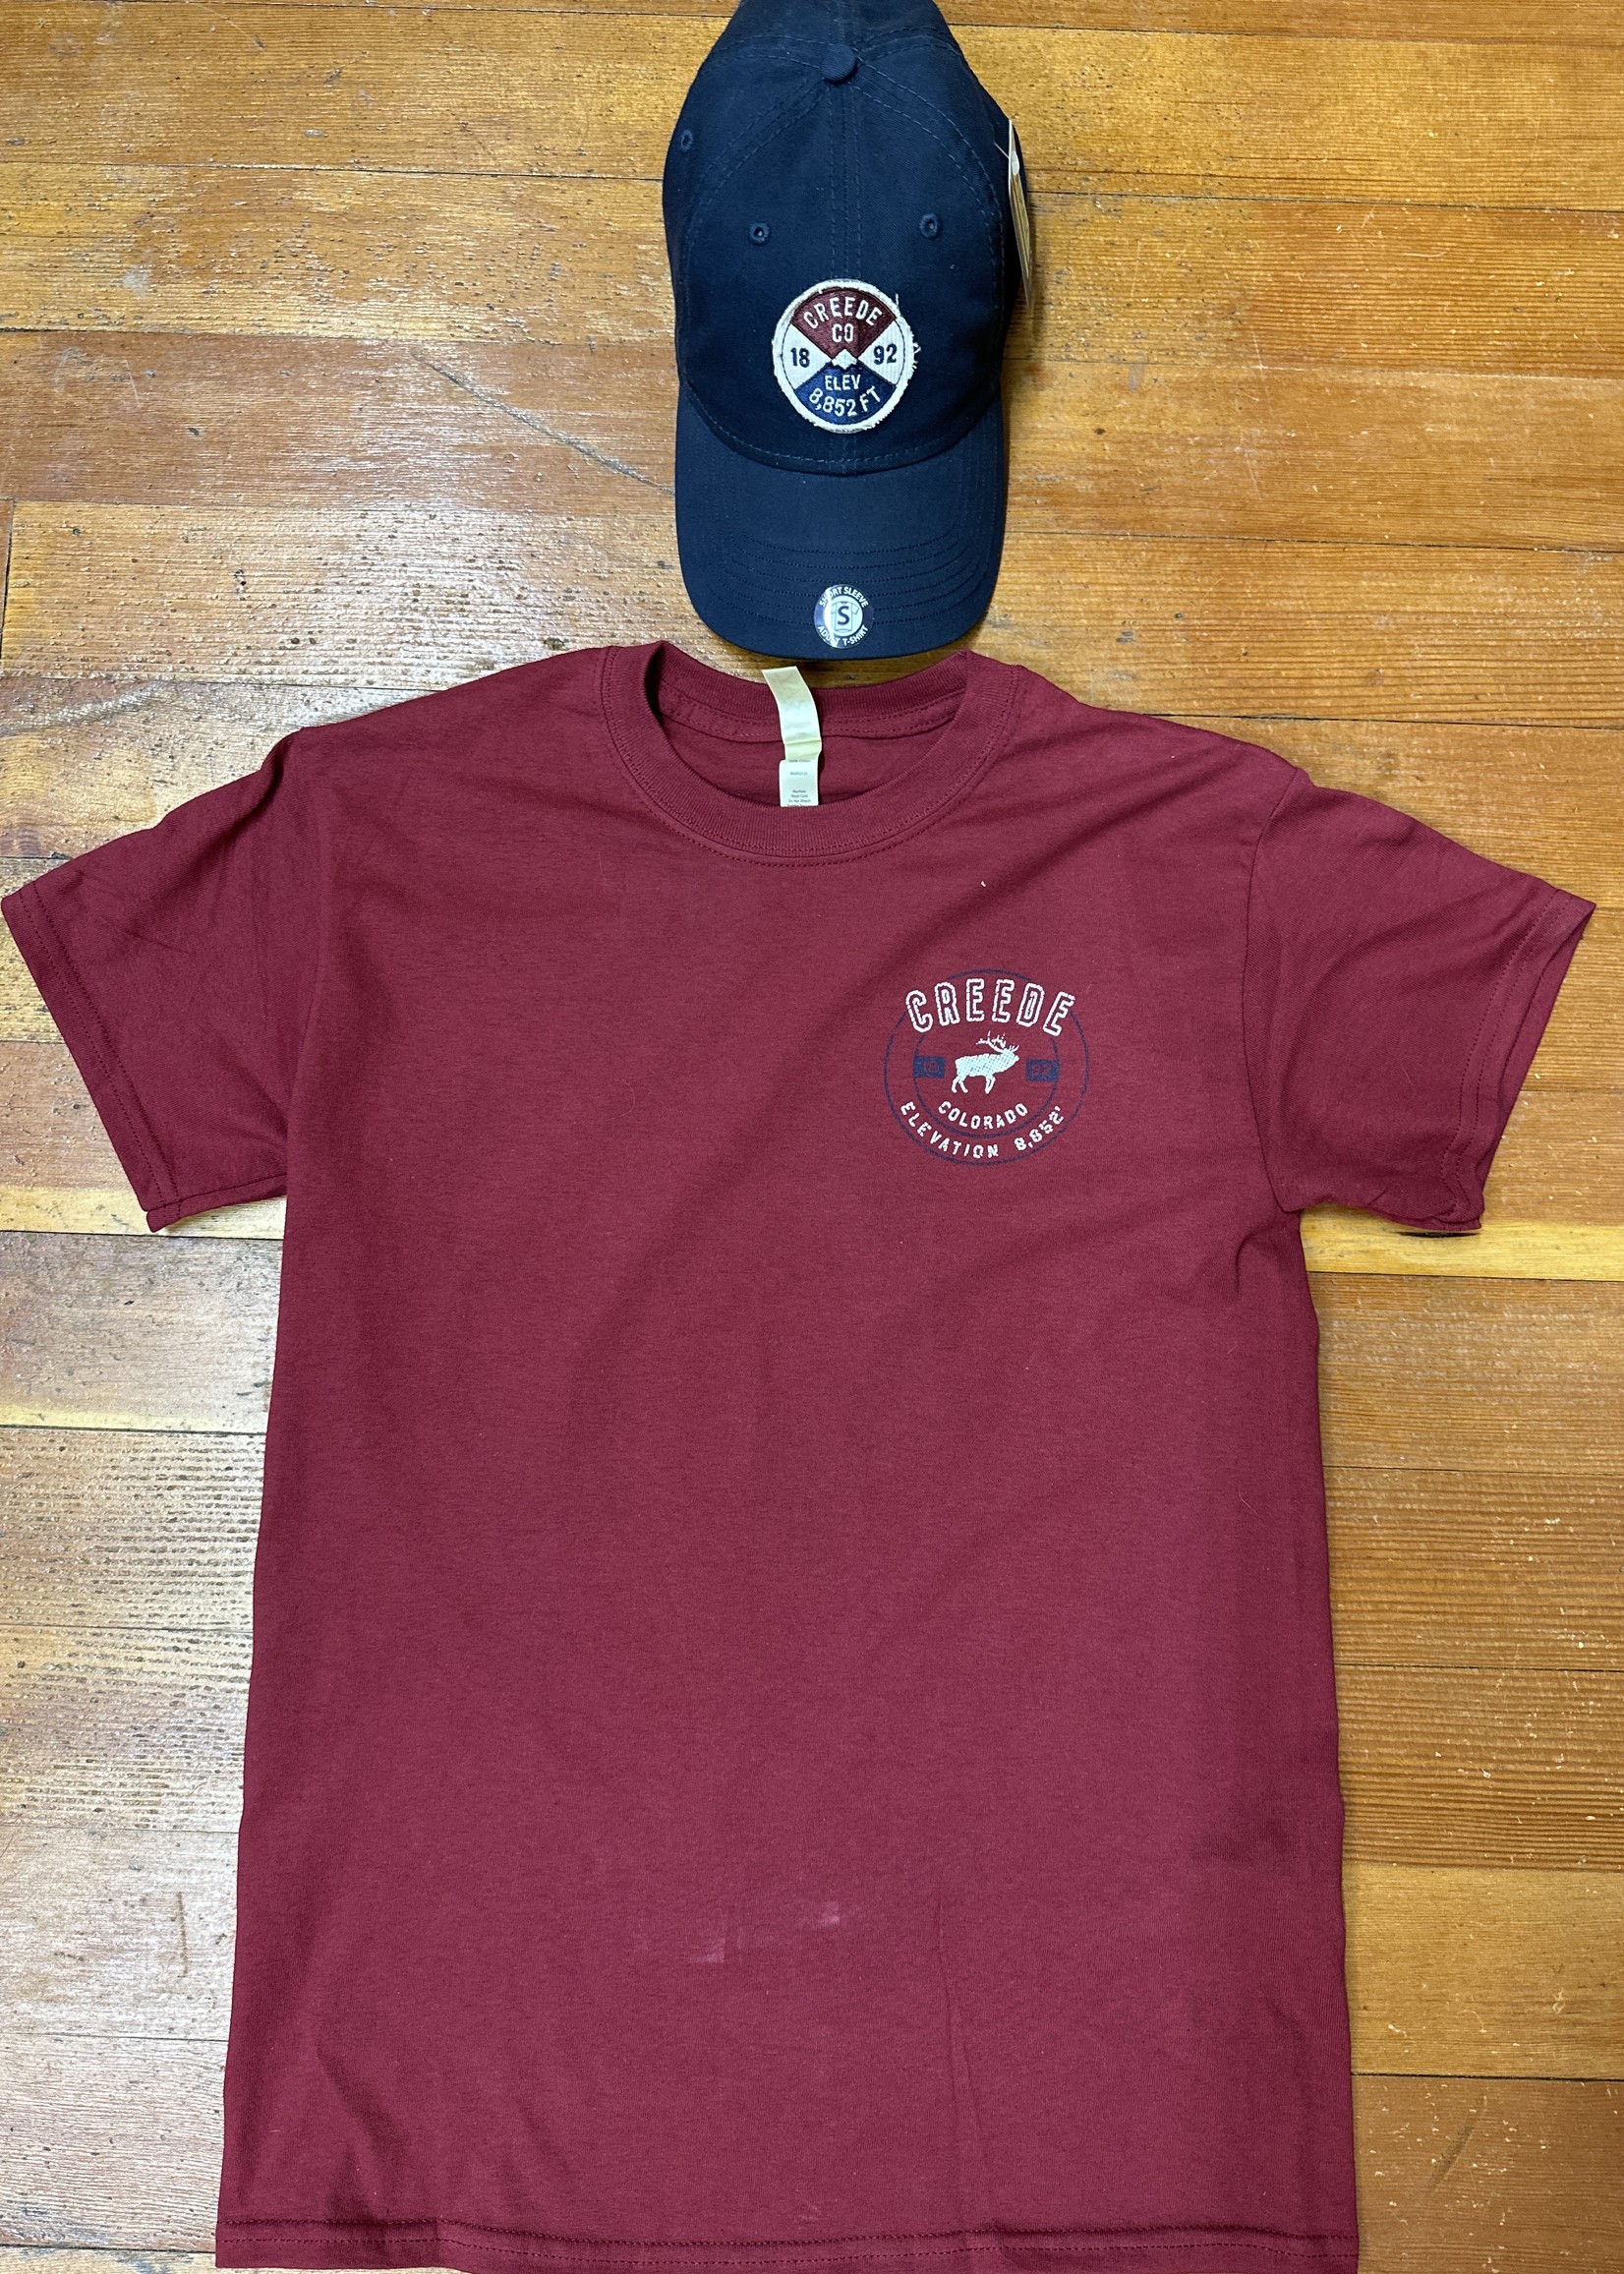 Ouray Ouray Hat/Shirt Combo Red/Blue